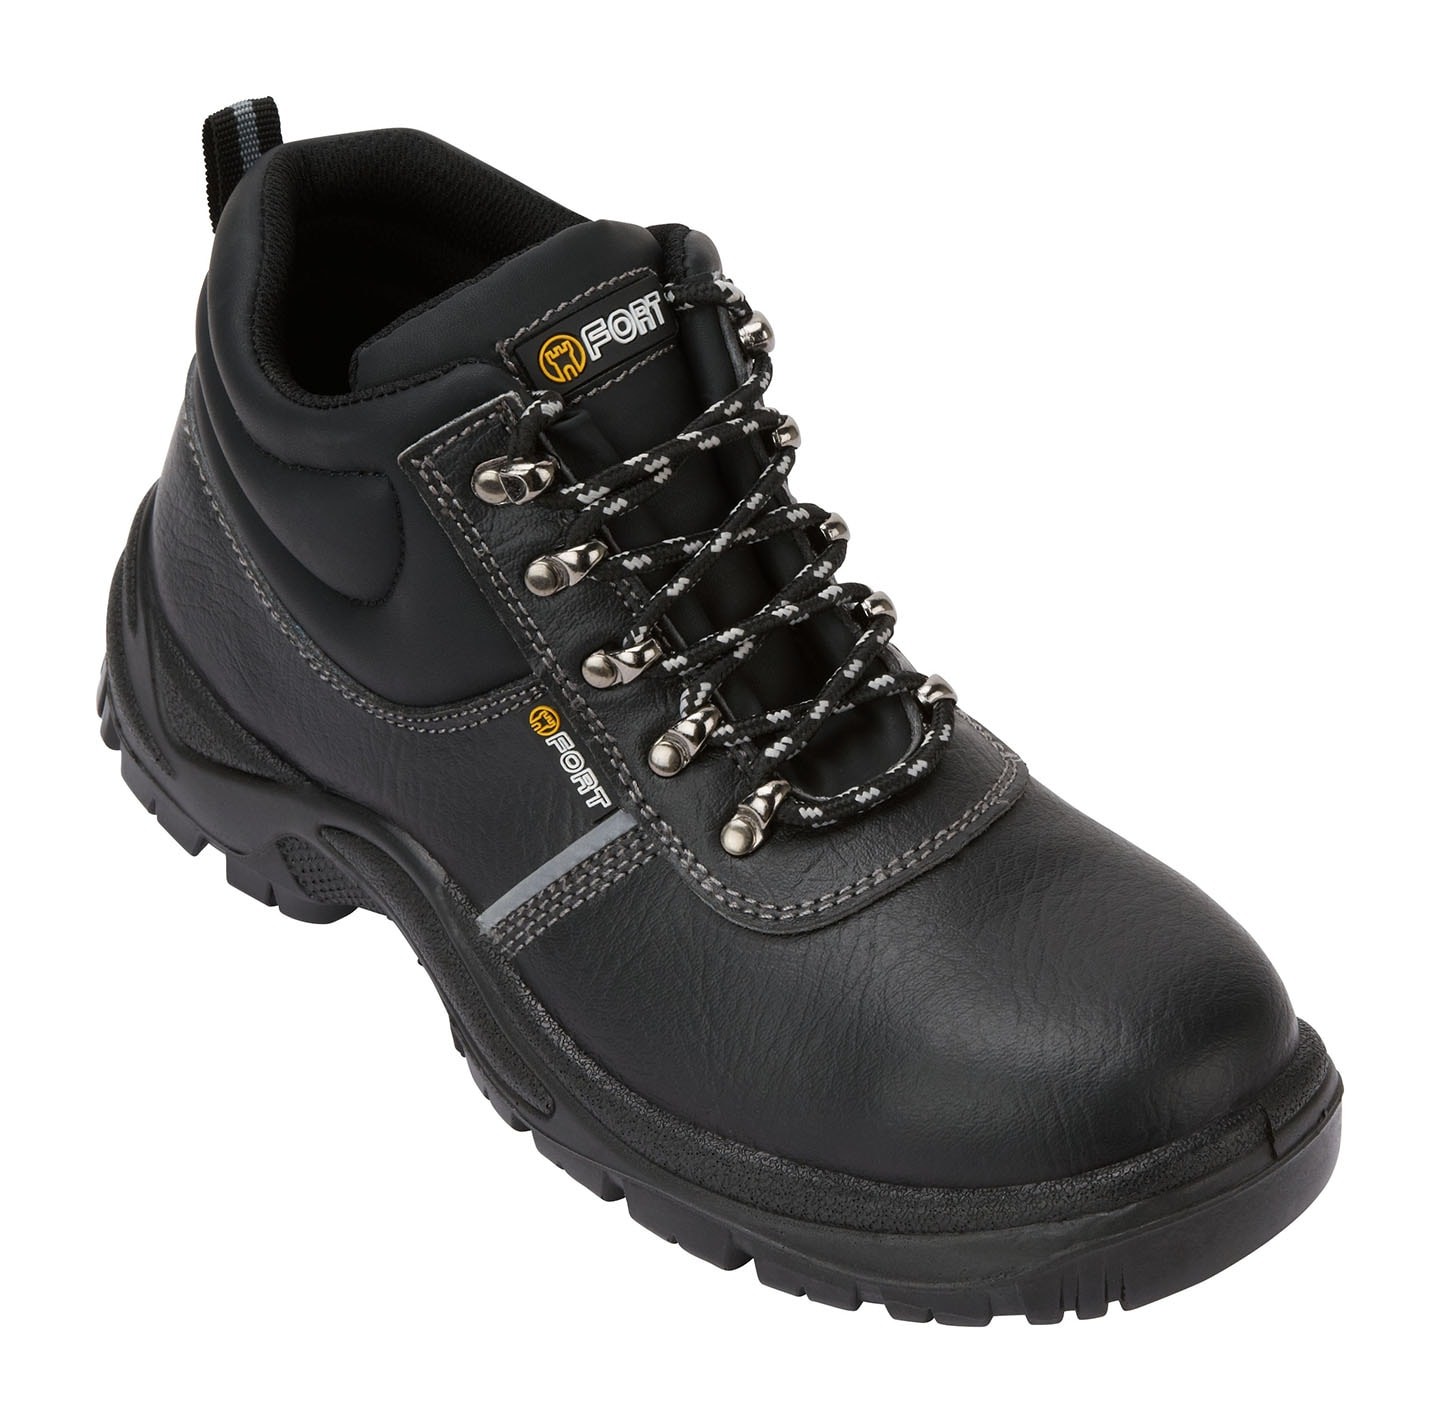 Fort Workforce Safety Boot